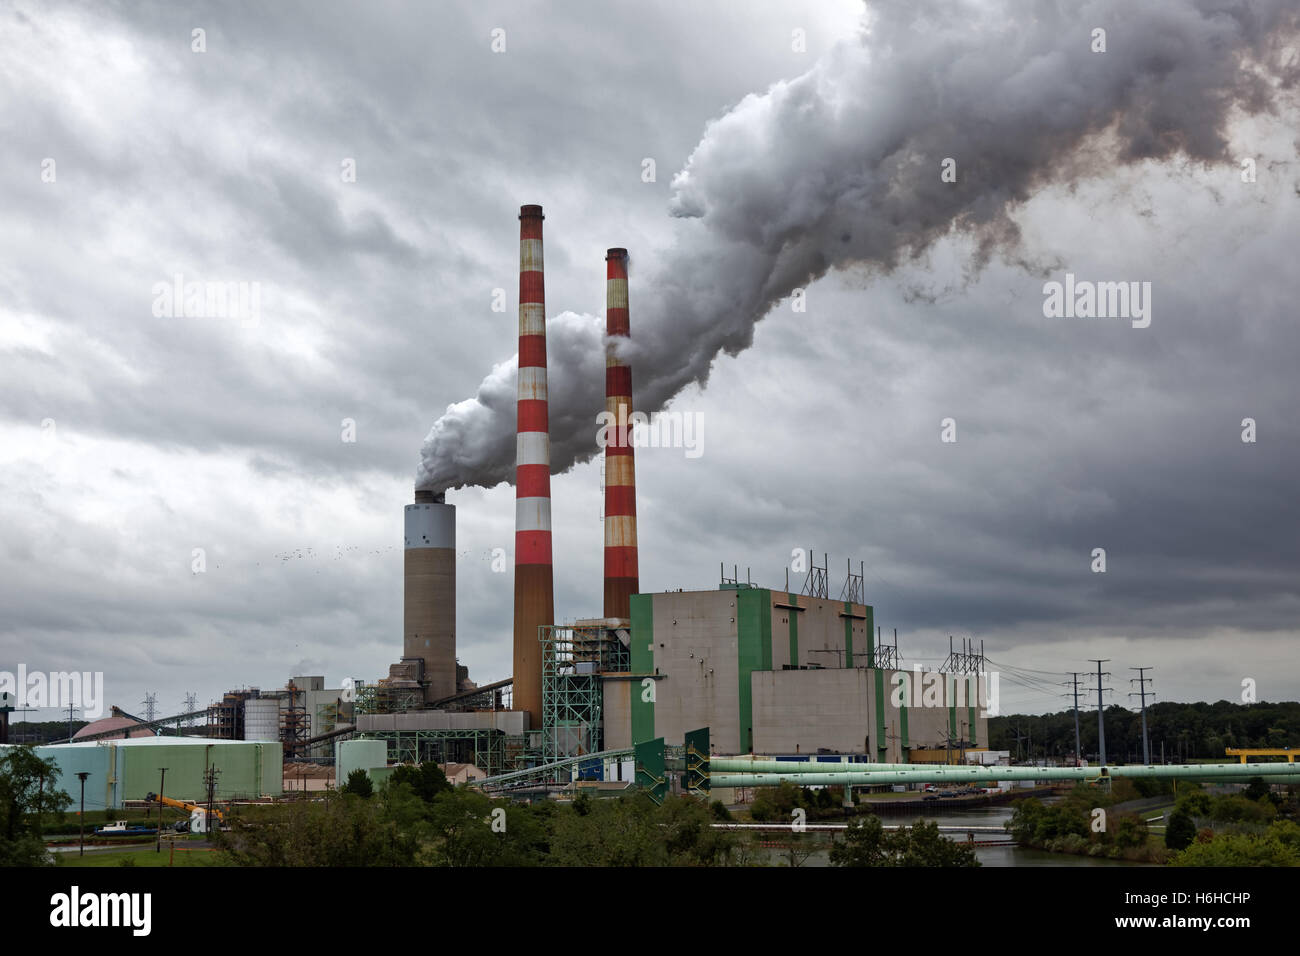 Coal and oil power generating plant with emitting clouds of polluted steam and smoke Stock Photo